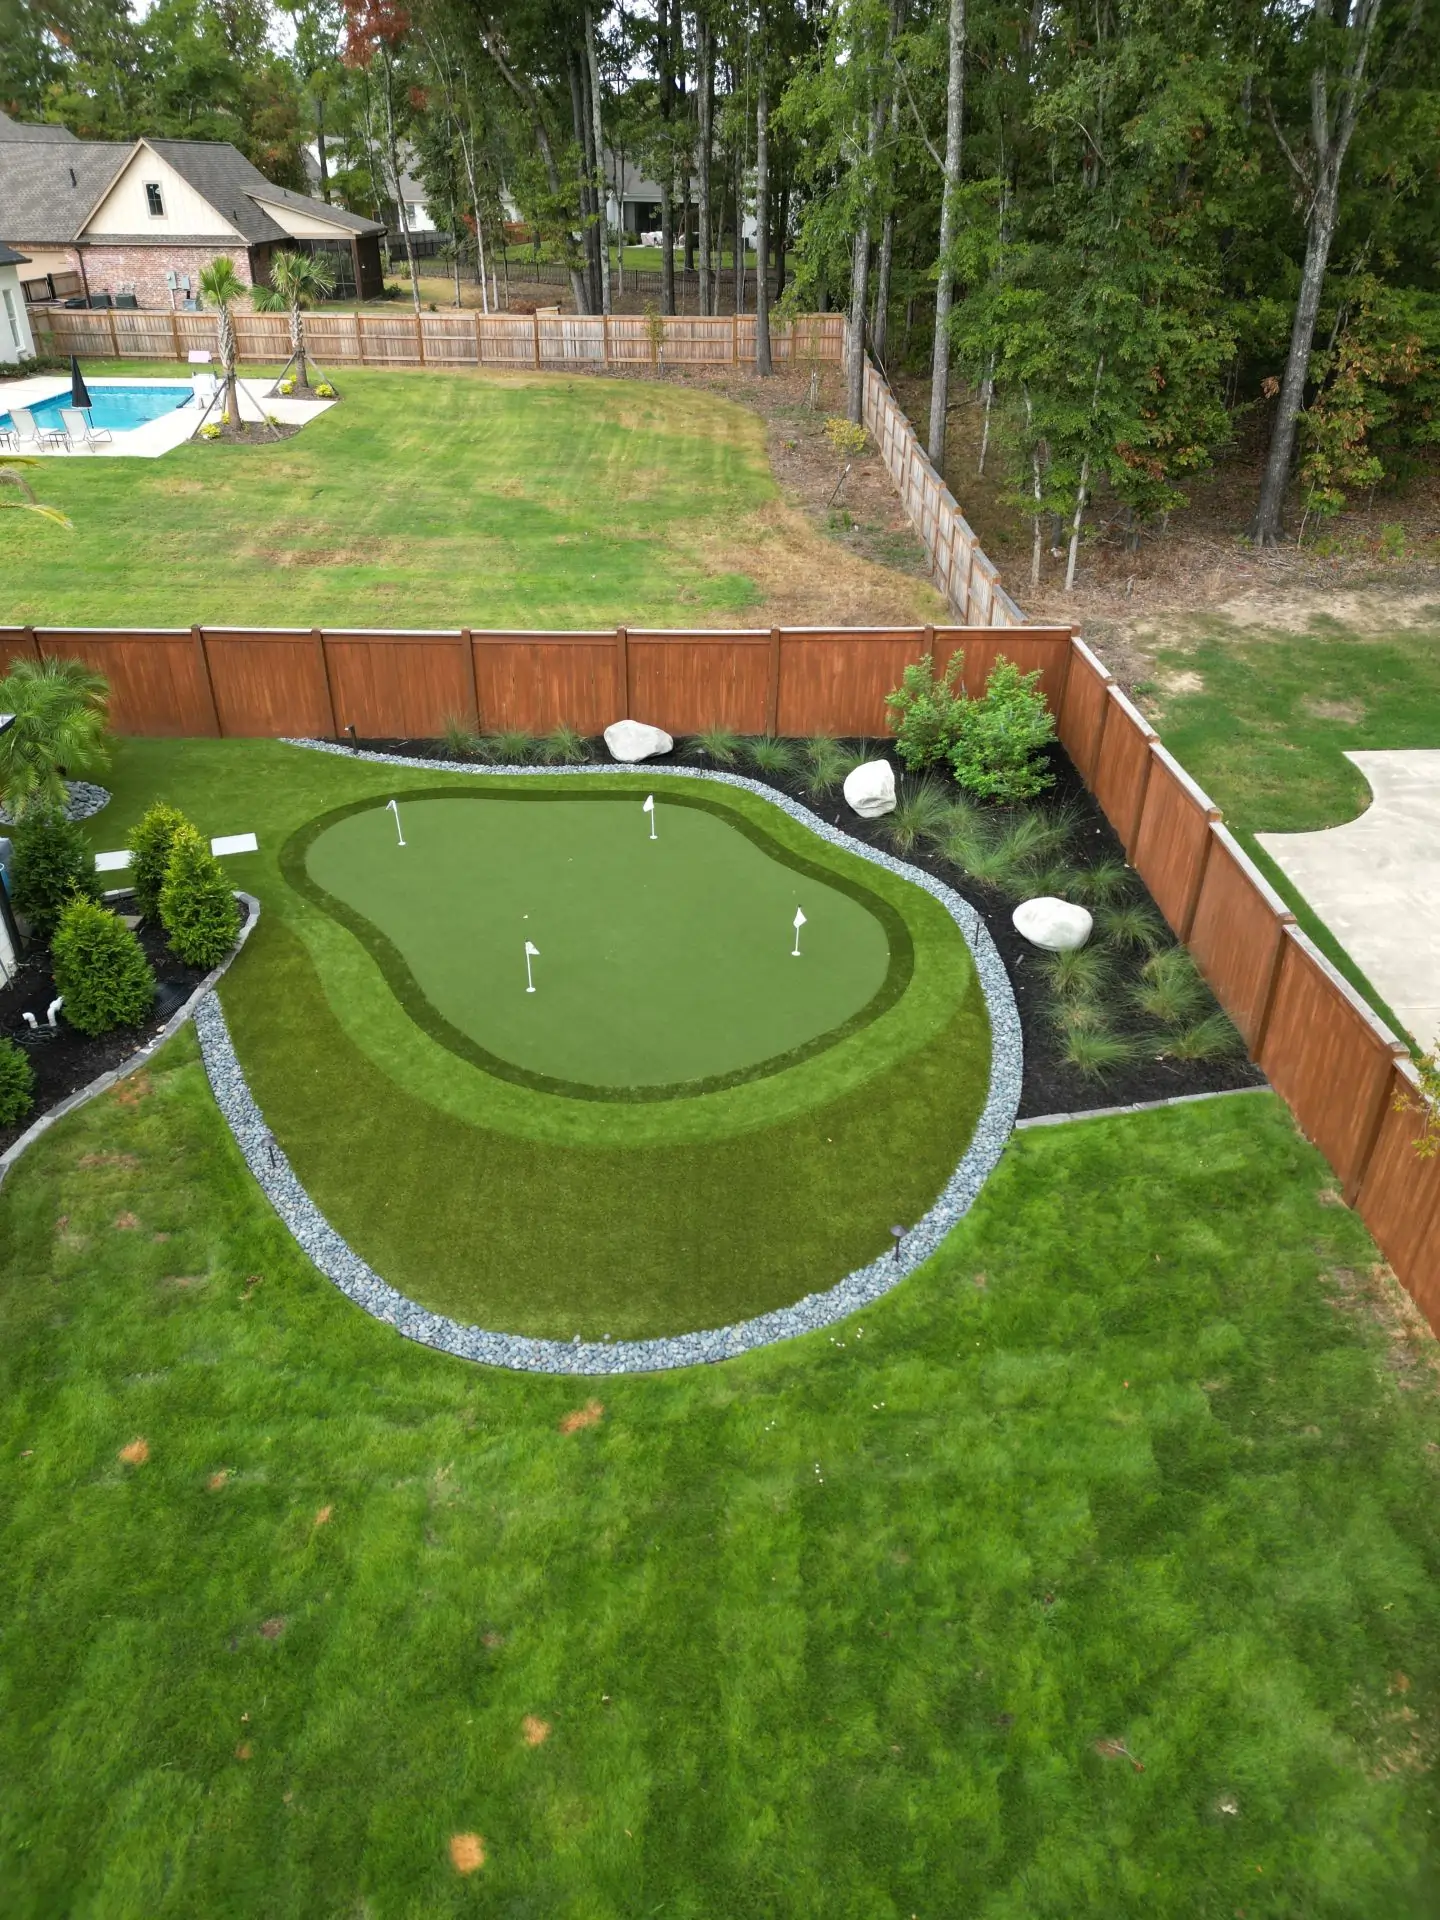 synthetic grass putting green lawn in back yard